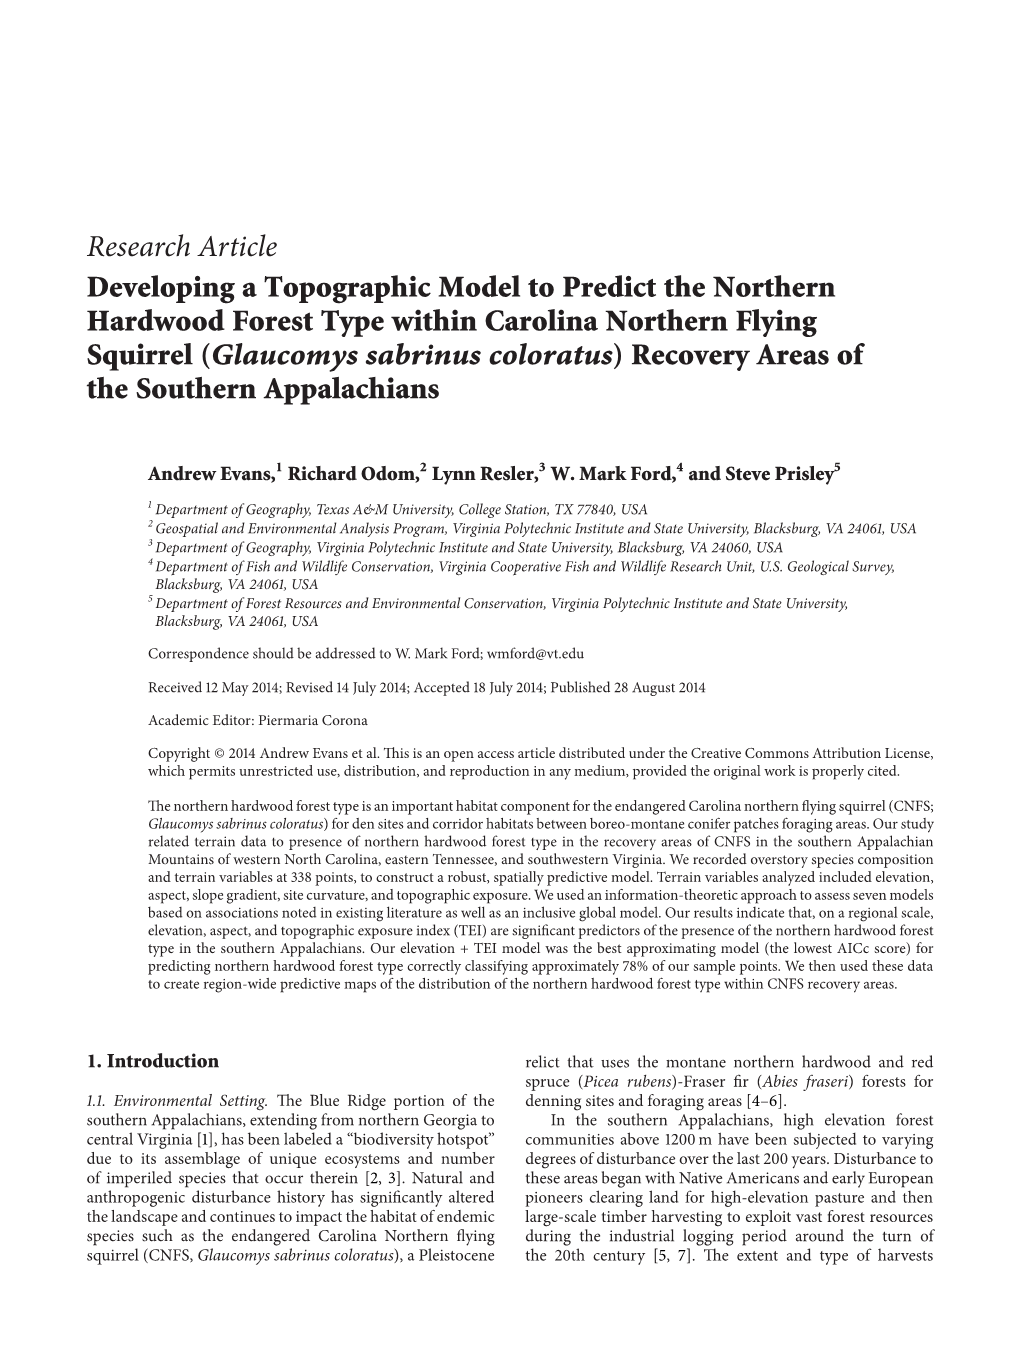 Research Article Developing a Topographic Model to Predict The